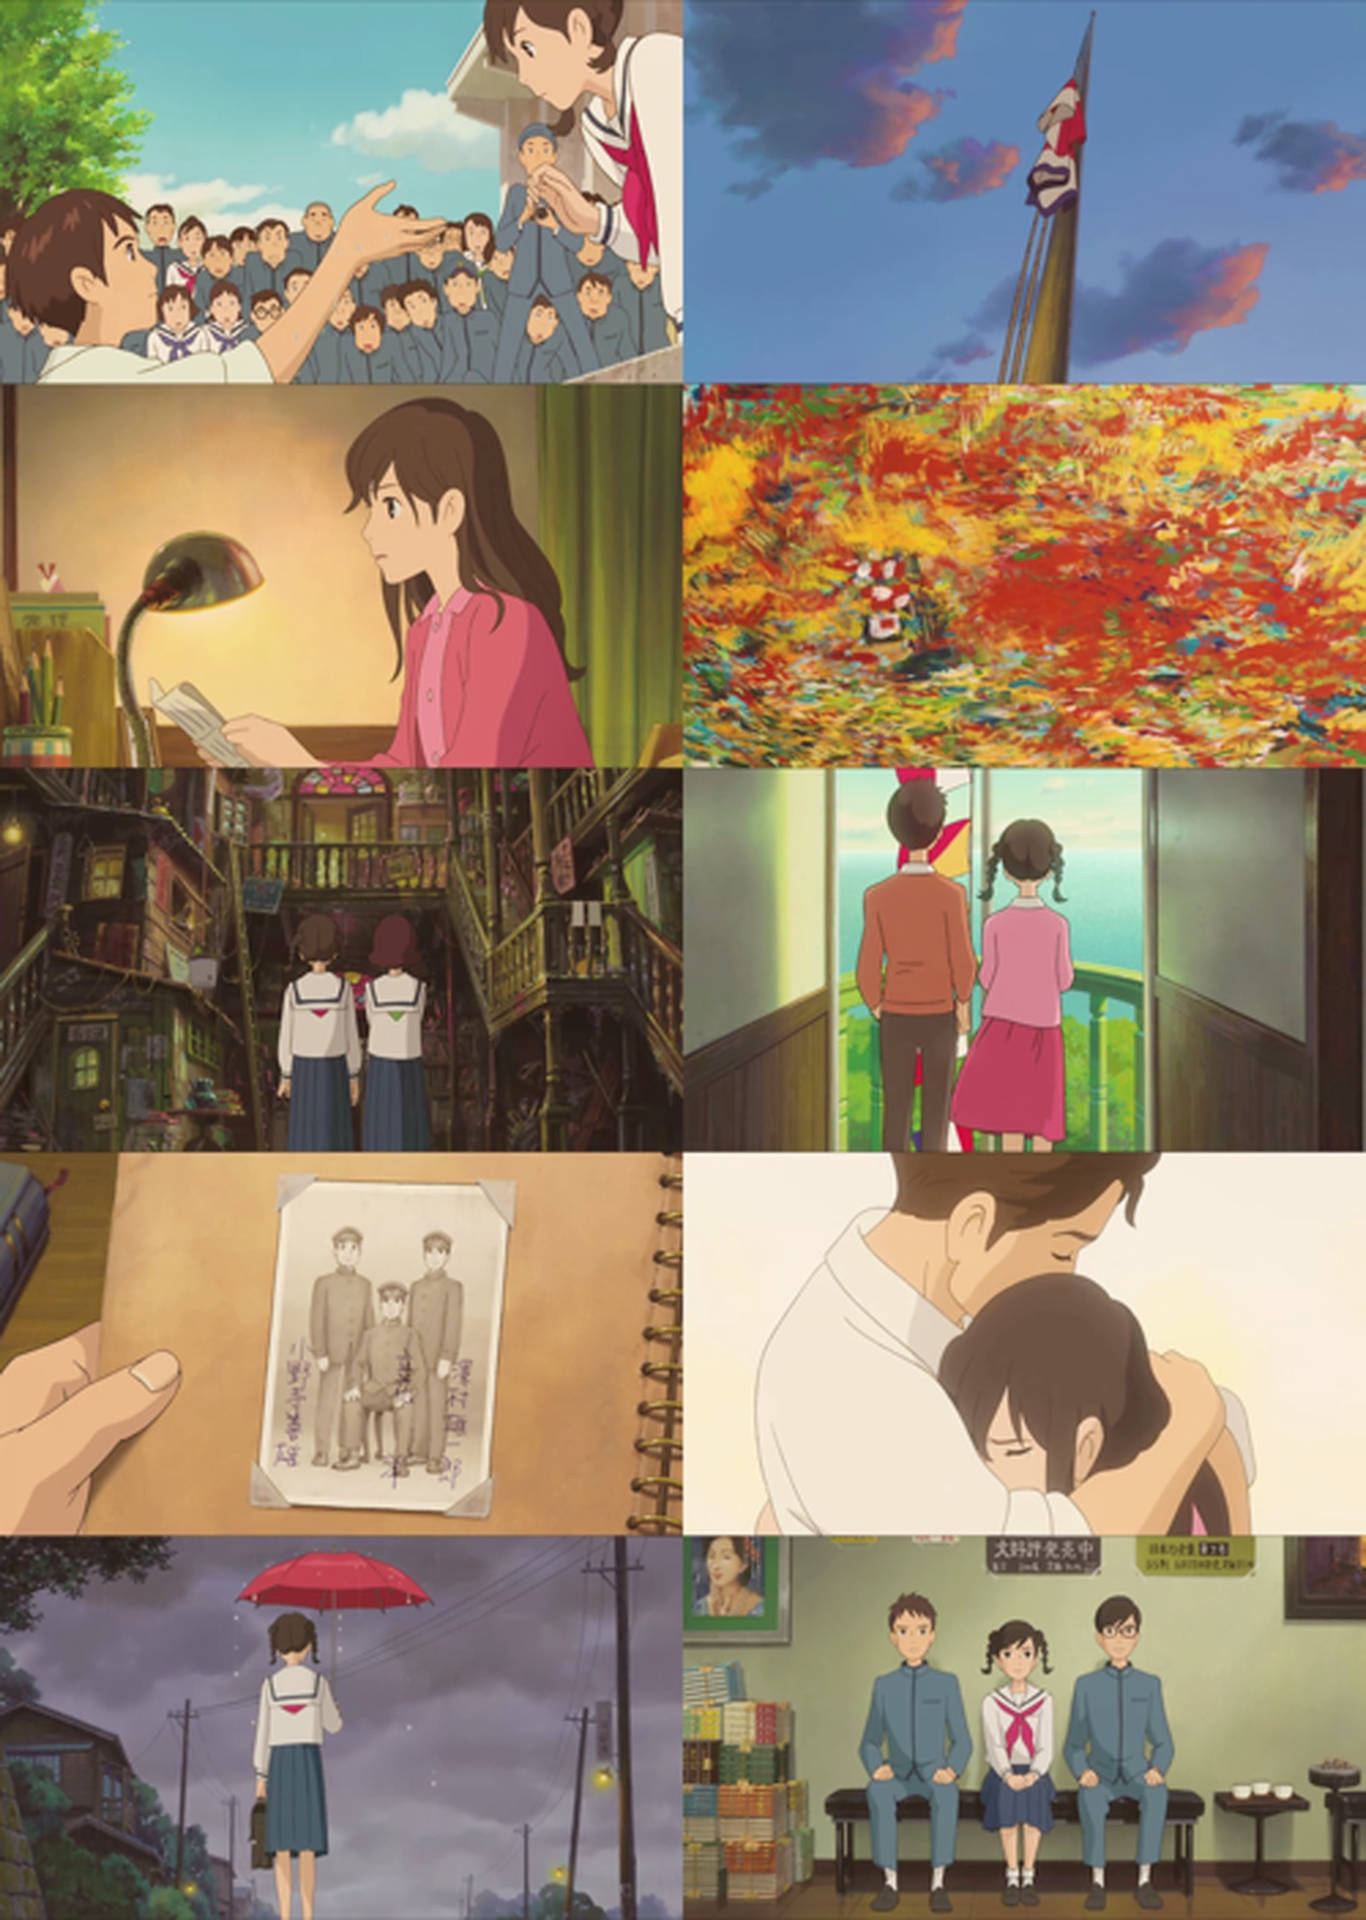 Captivating Scenery From The Movie 'from Up On Poppy Hill' Background